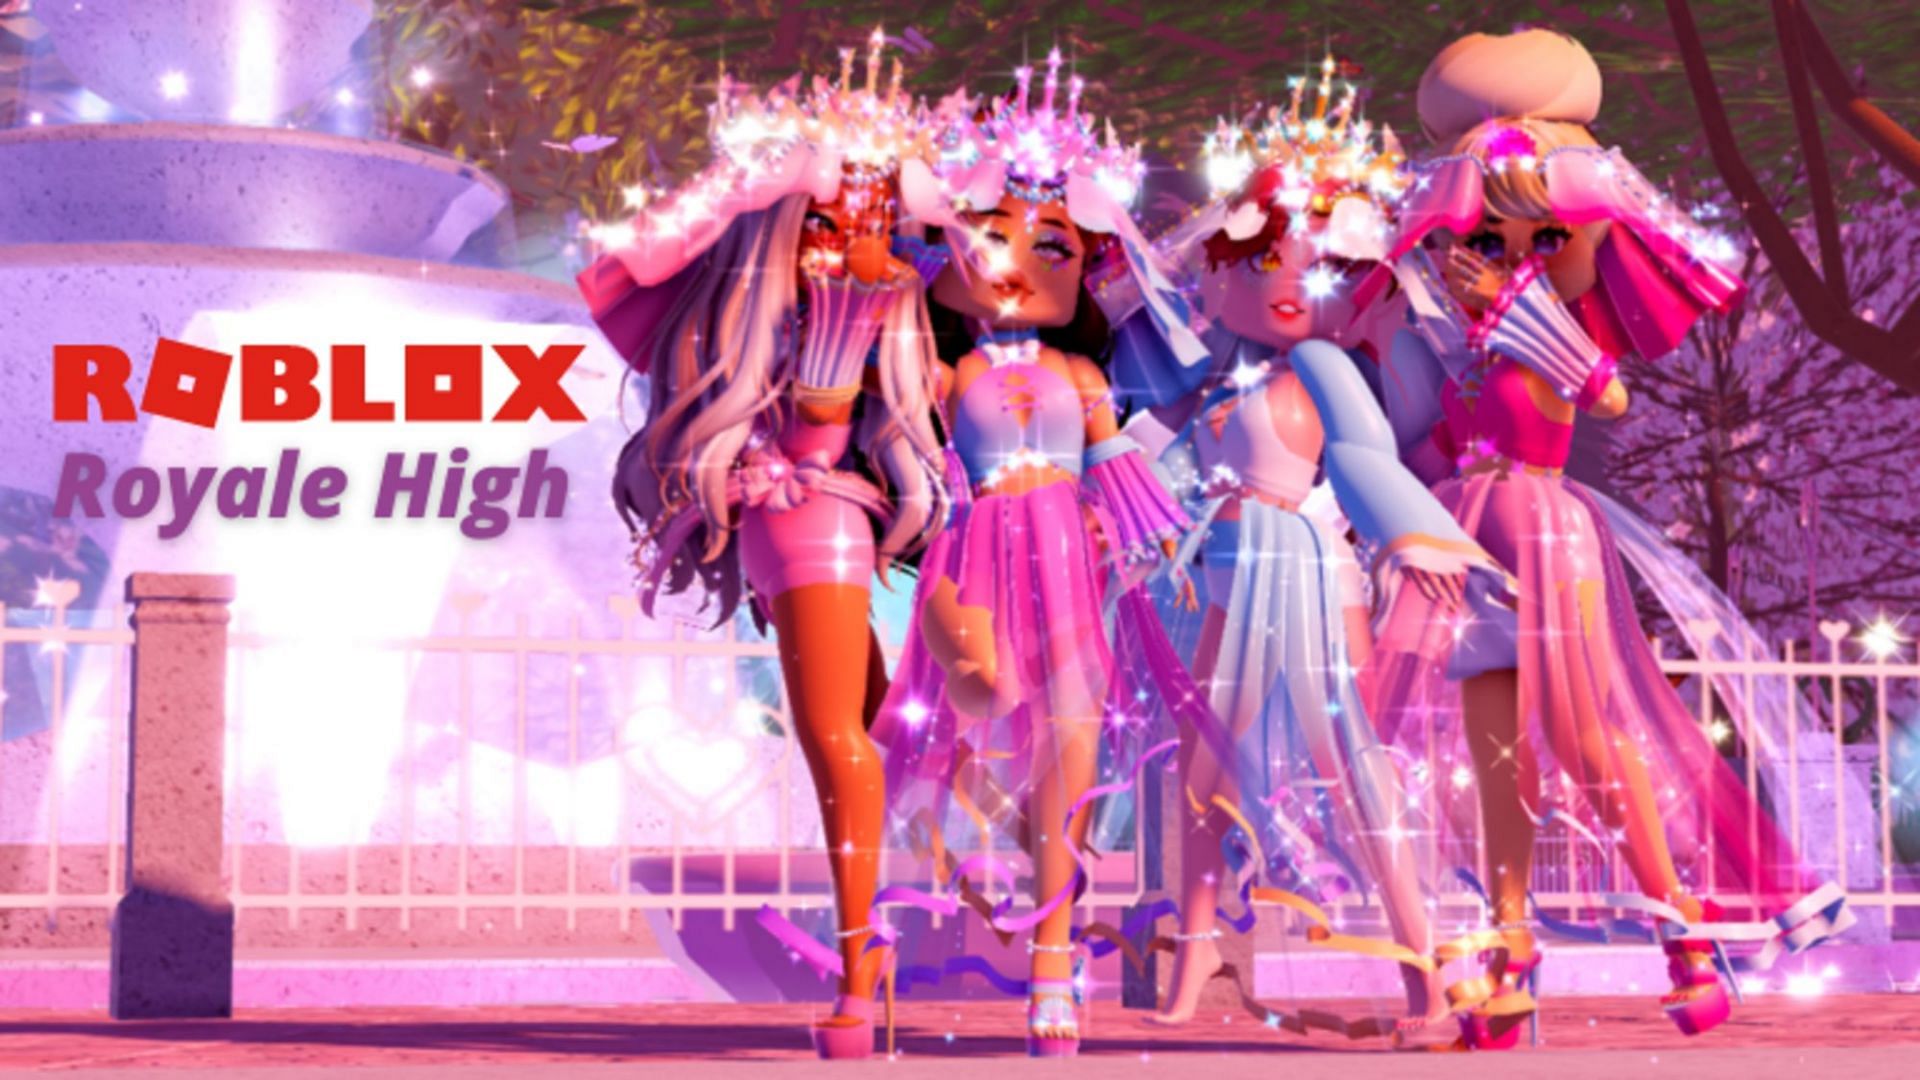 Be glamorous with the best skirts in Royale High (Image via Roblox)